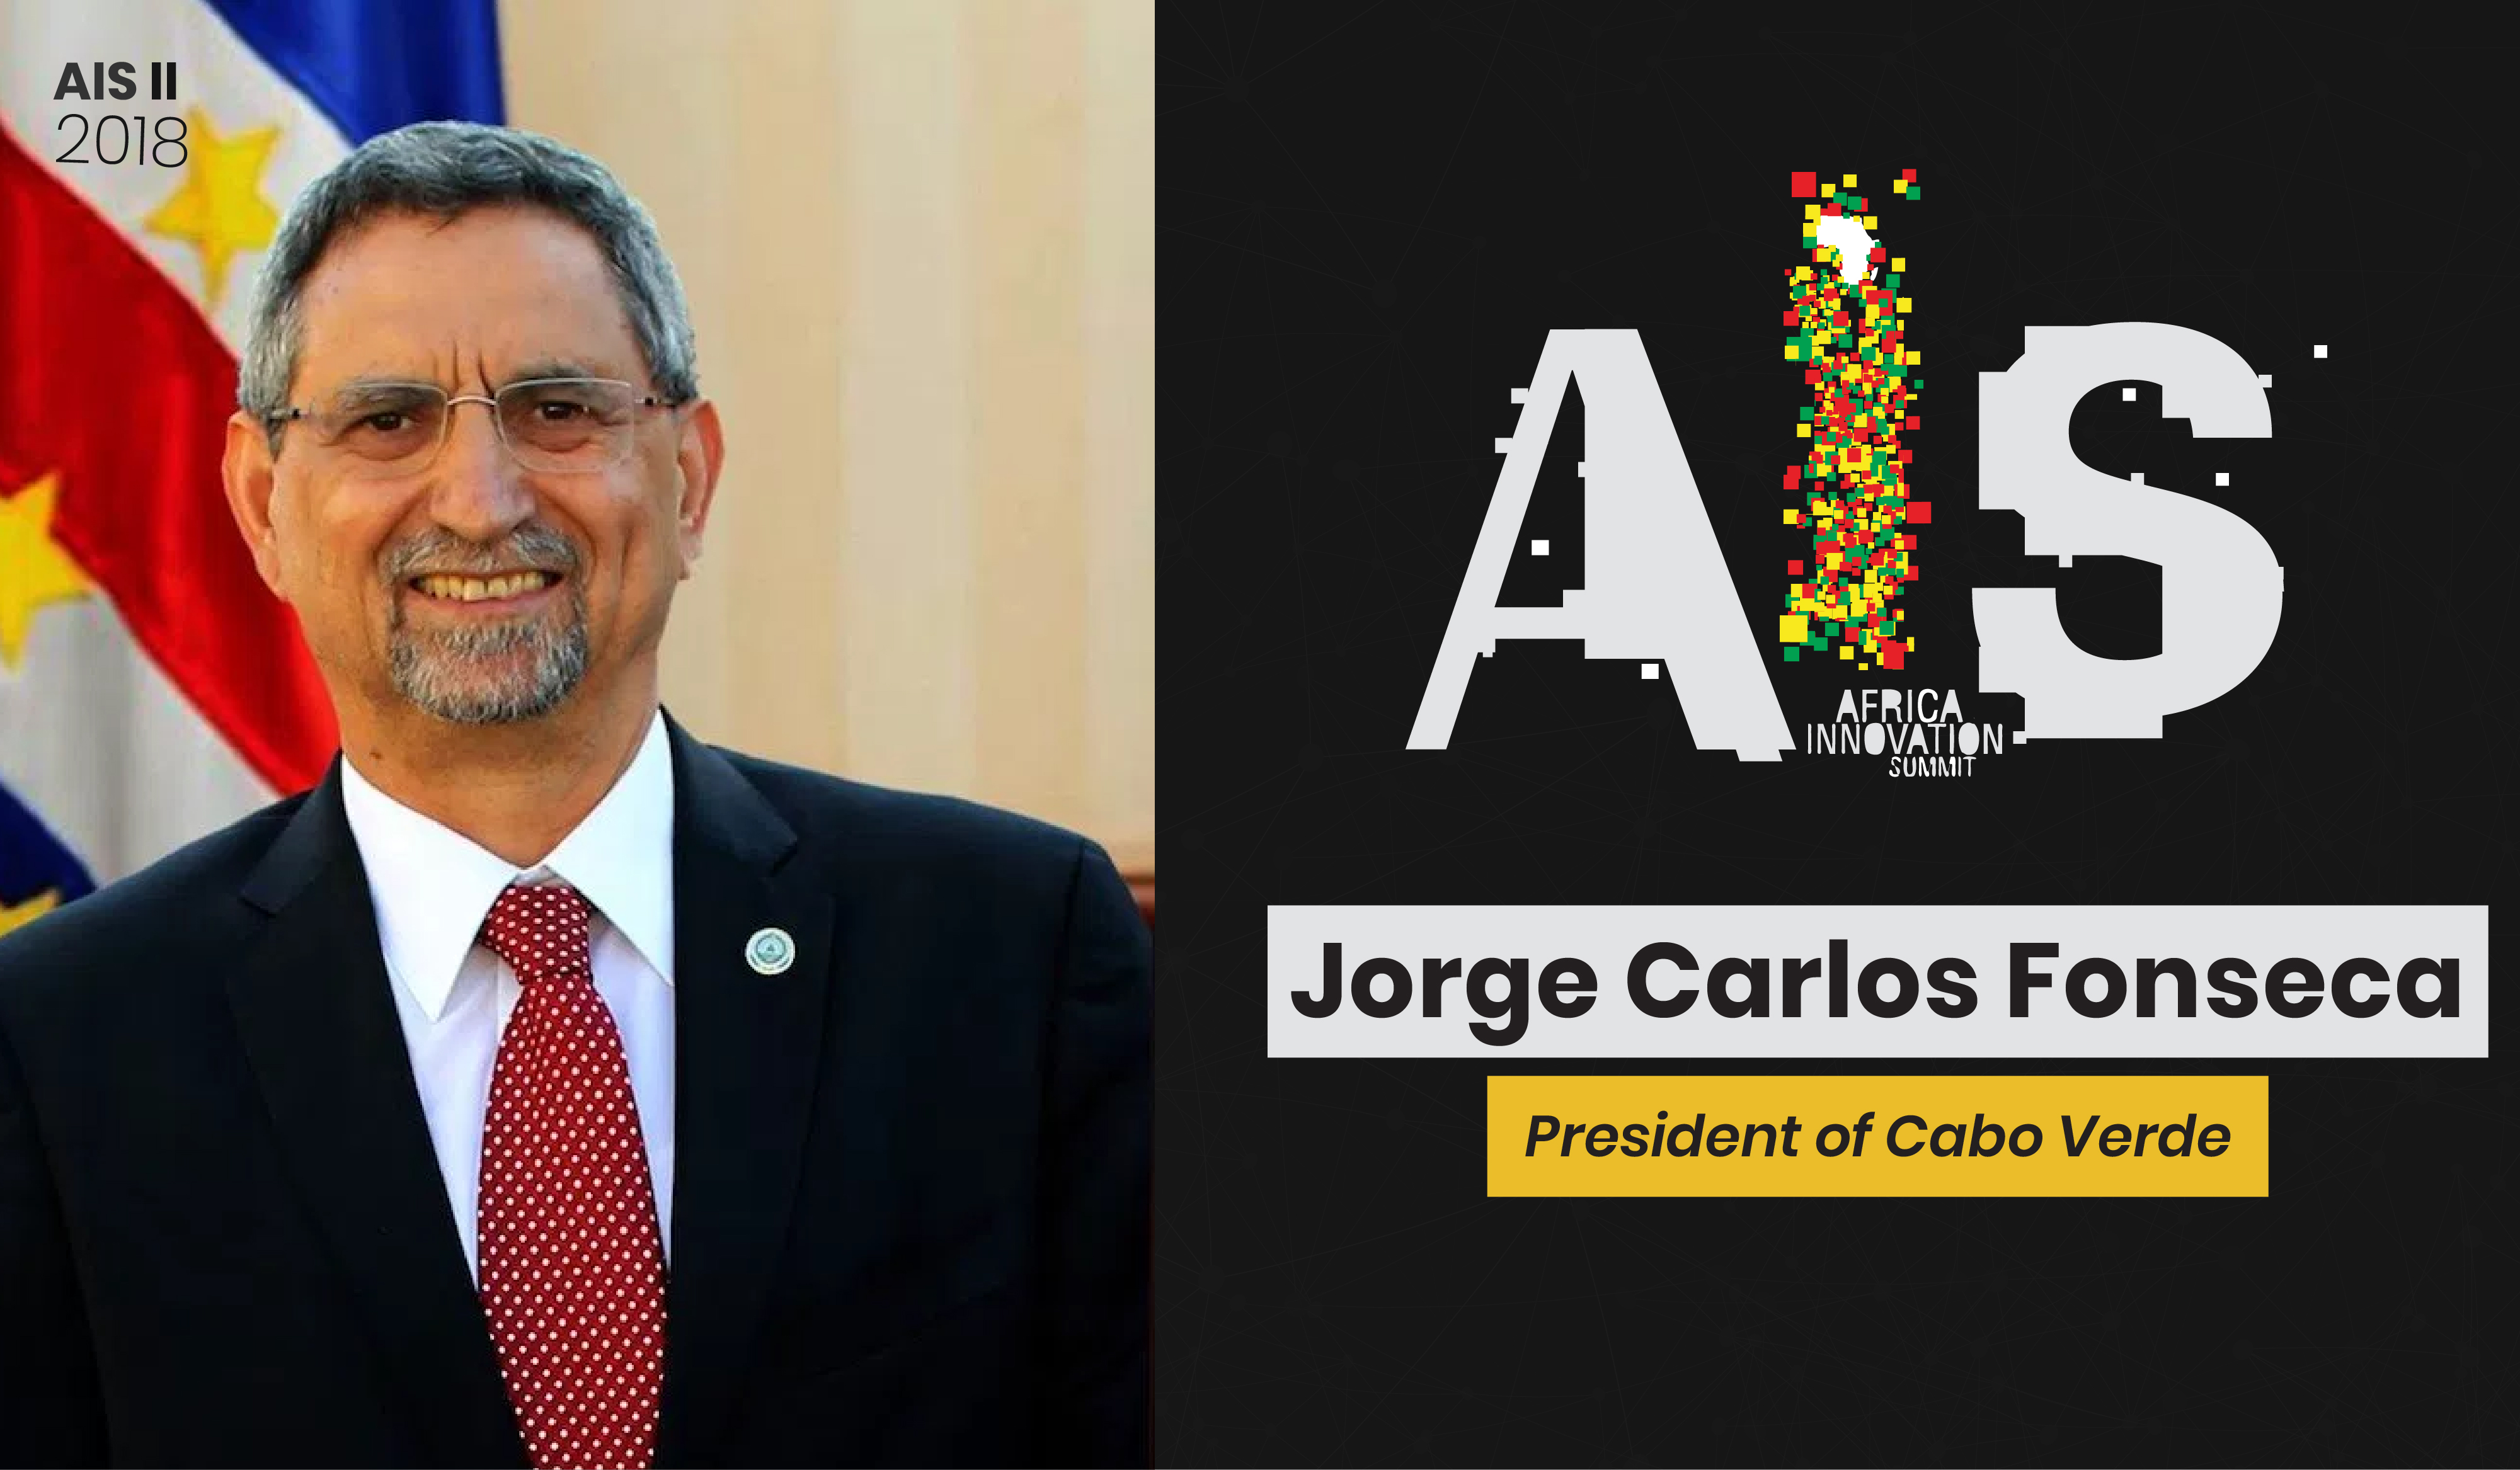 President of Cabo Verde, Jorge Carlos Fonseca calls for strong mobilization around the Africa Innovation Summit, Kigali 2018